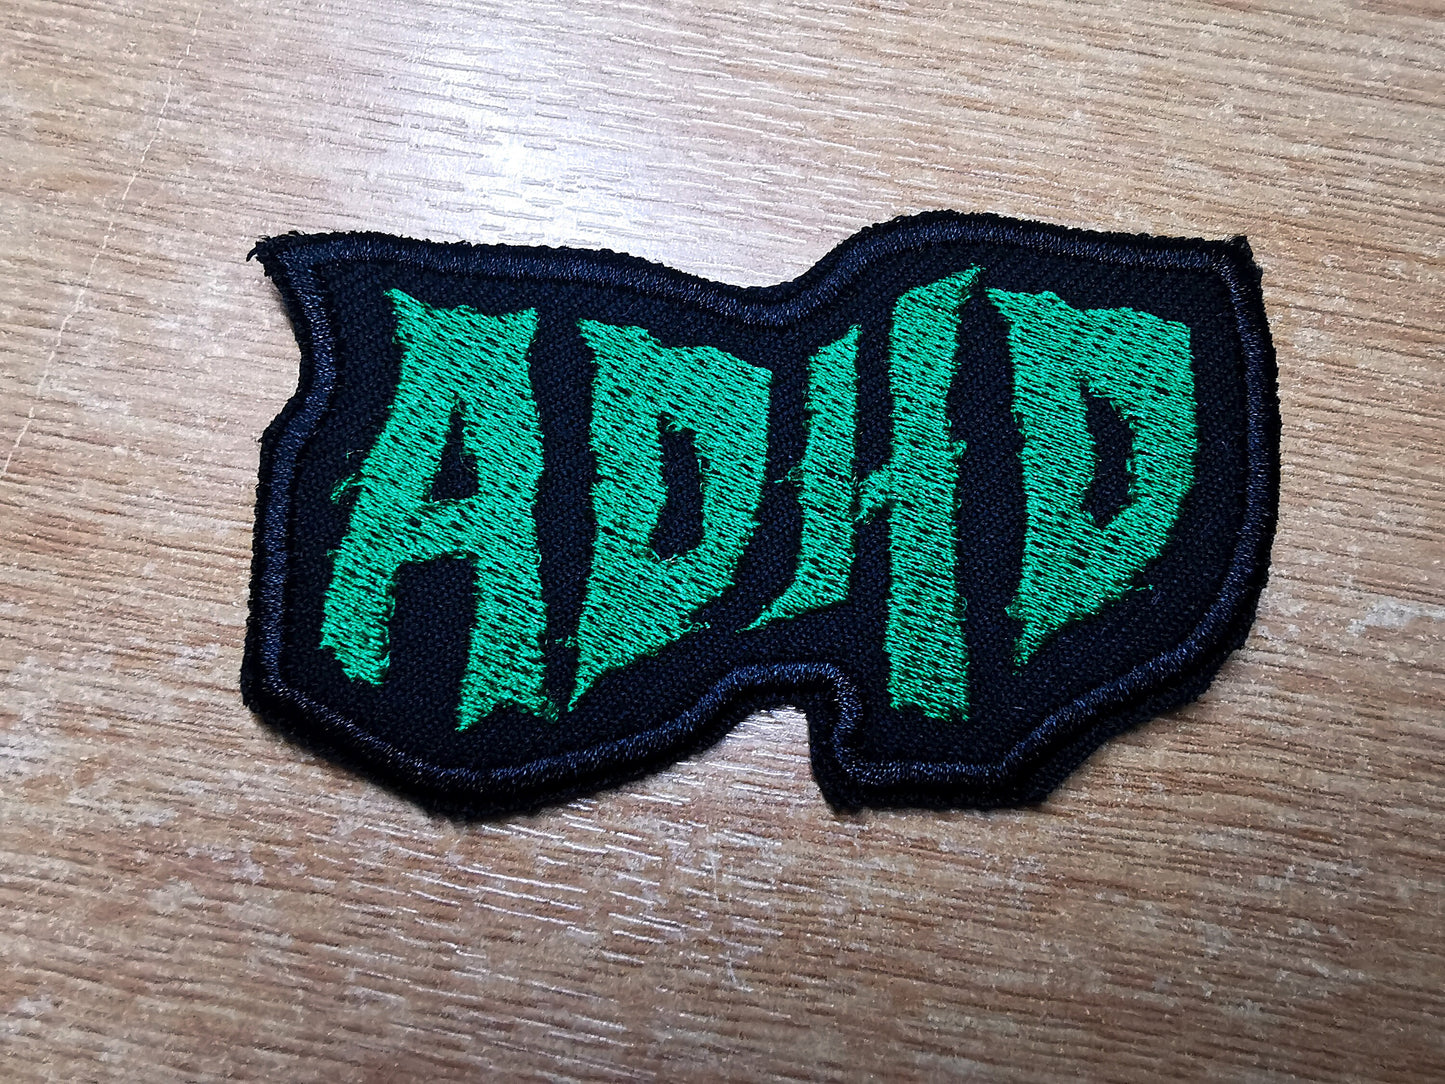 ADHD Jade Green Death Metal Iron On Embroidered Patch Neurodiversity ND Black Metal